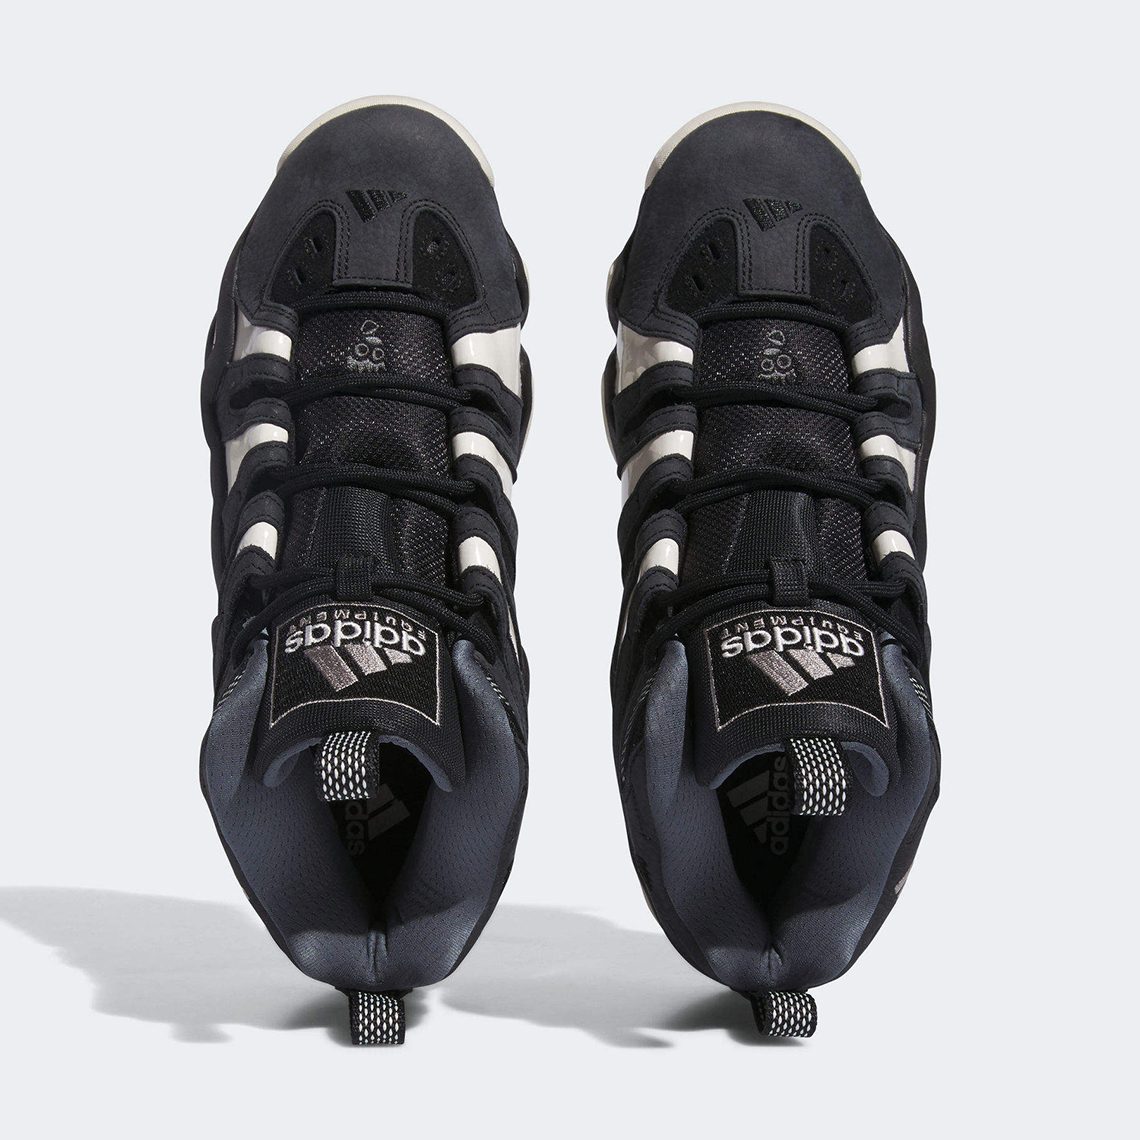 Adidas Crazy 8 Black White If2448 Release Date 7